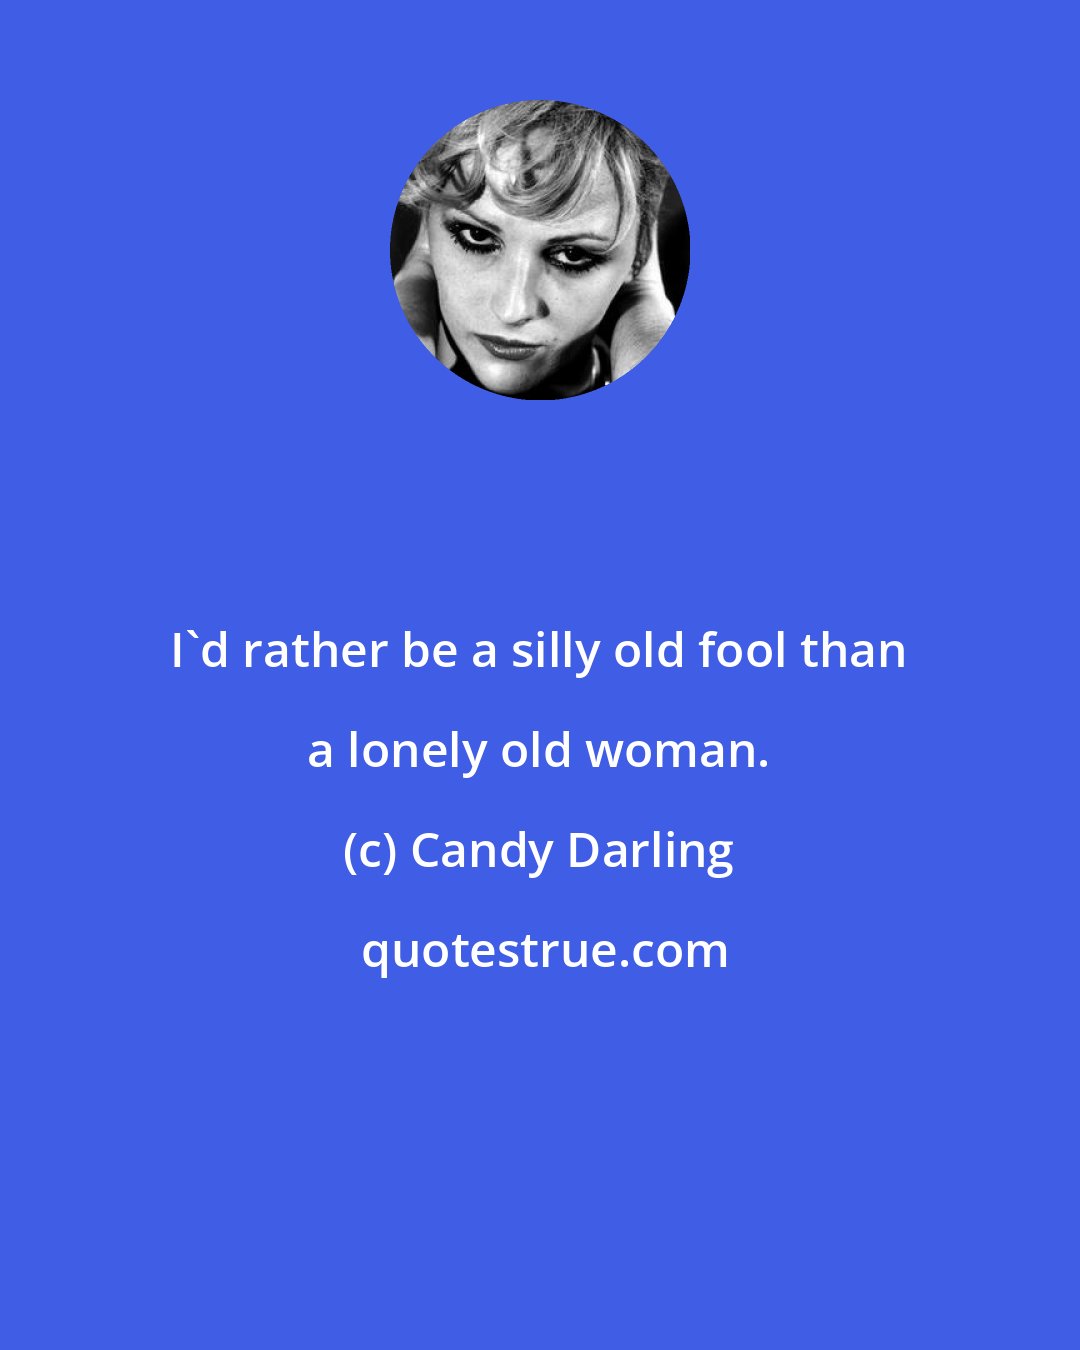 Candy Darling: I'd rather be a silly old fool than a lonely old woman.